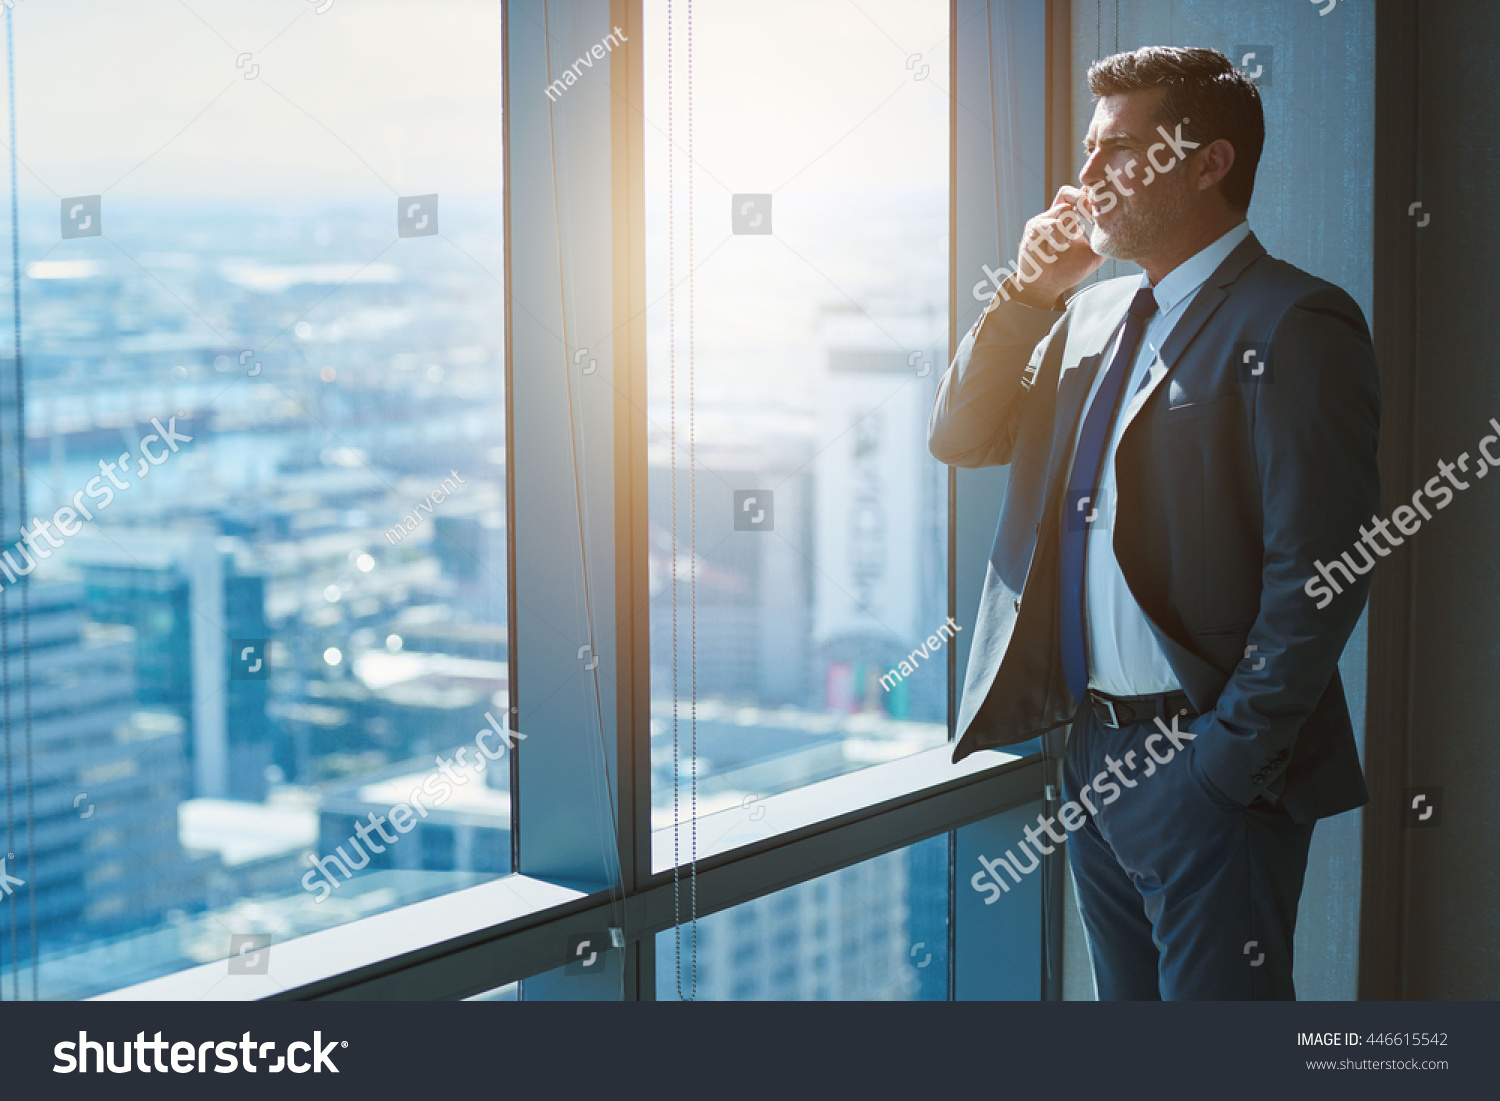 Handsome business CEO with designer stubble, talking confidently on his mobile phone while looking out of large windows in a top floor office at the city below #446615542